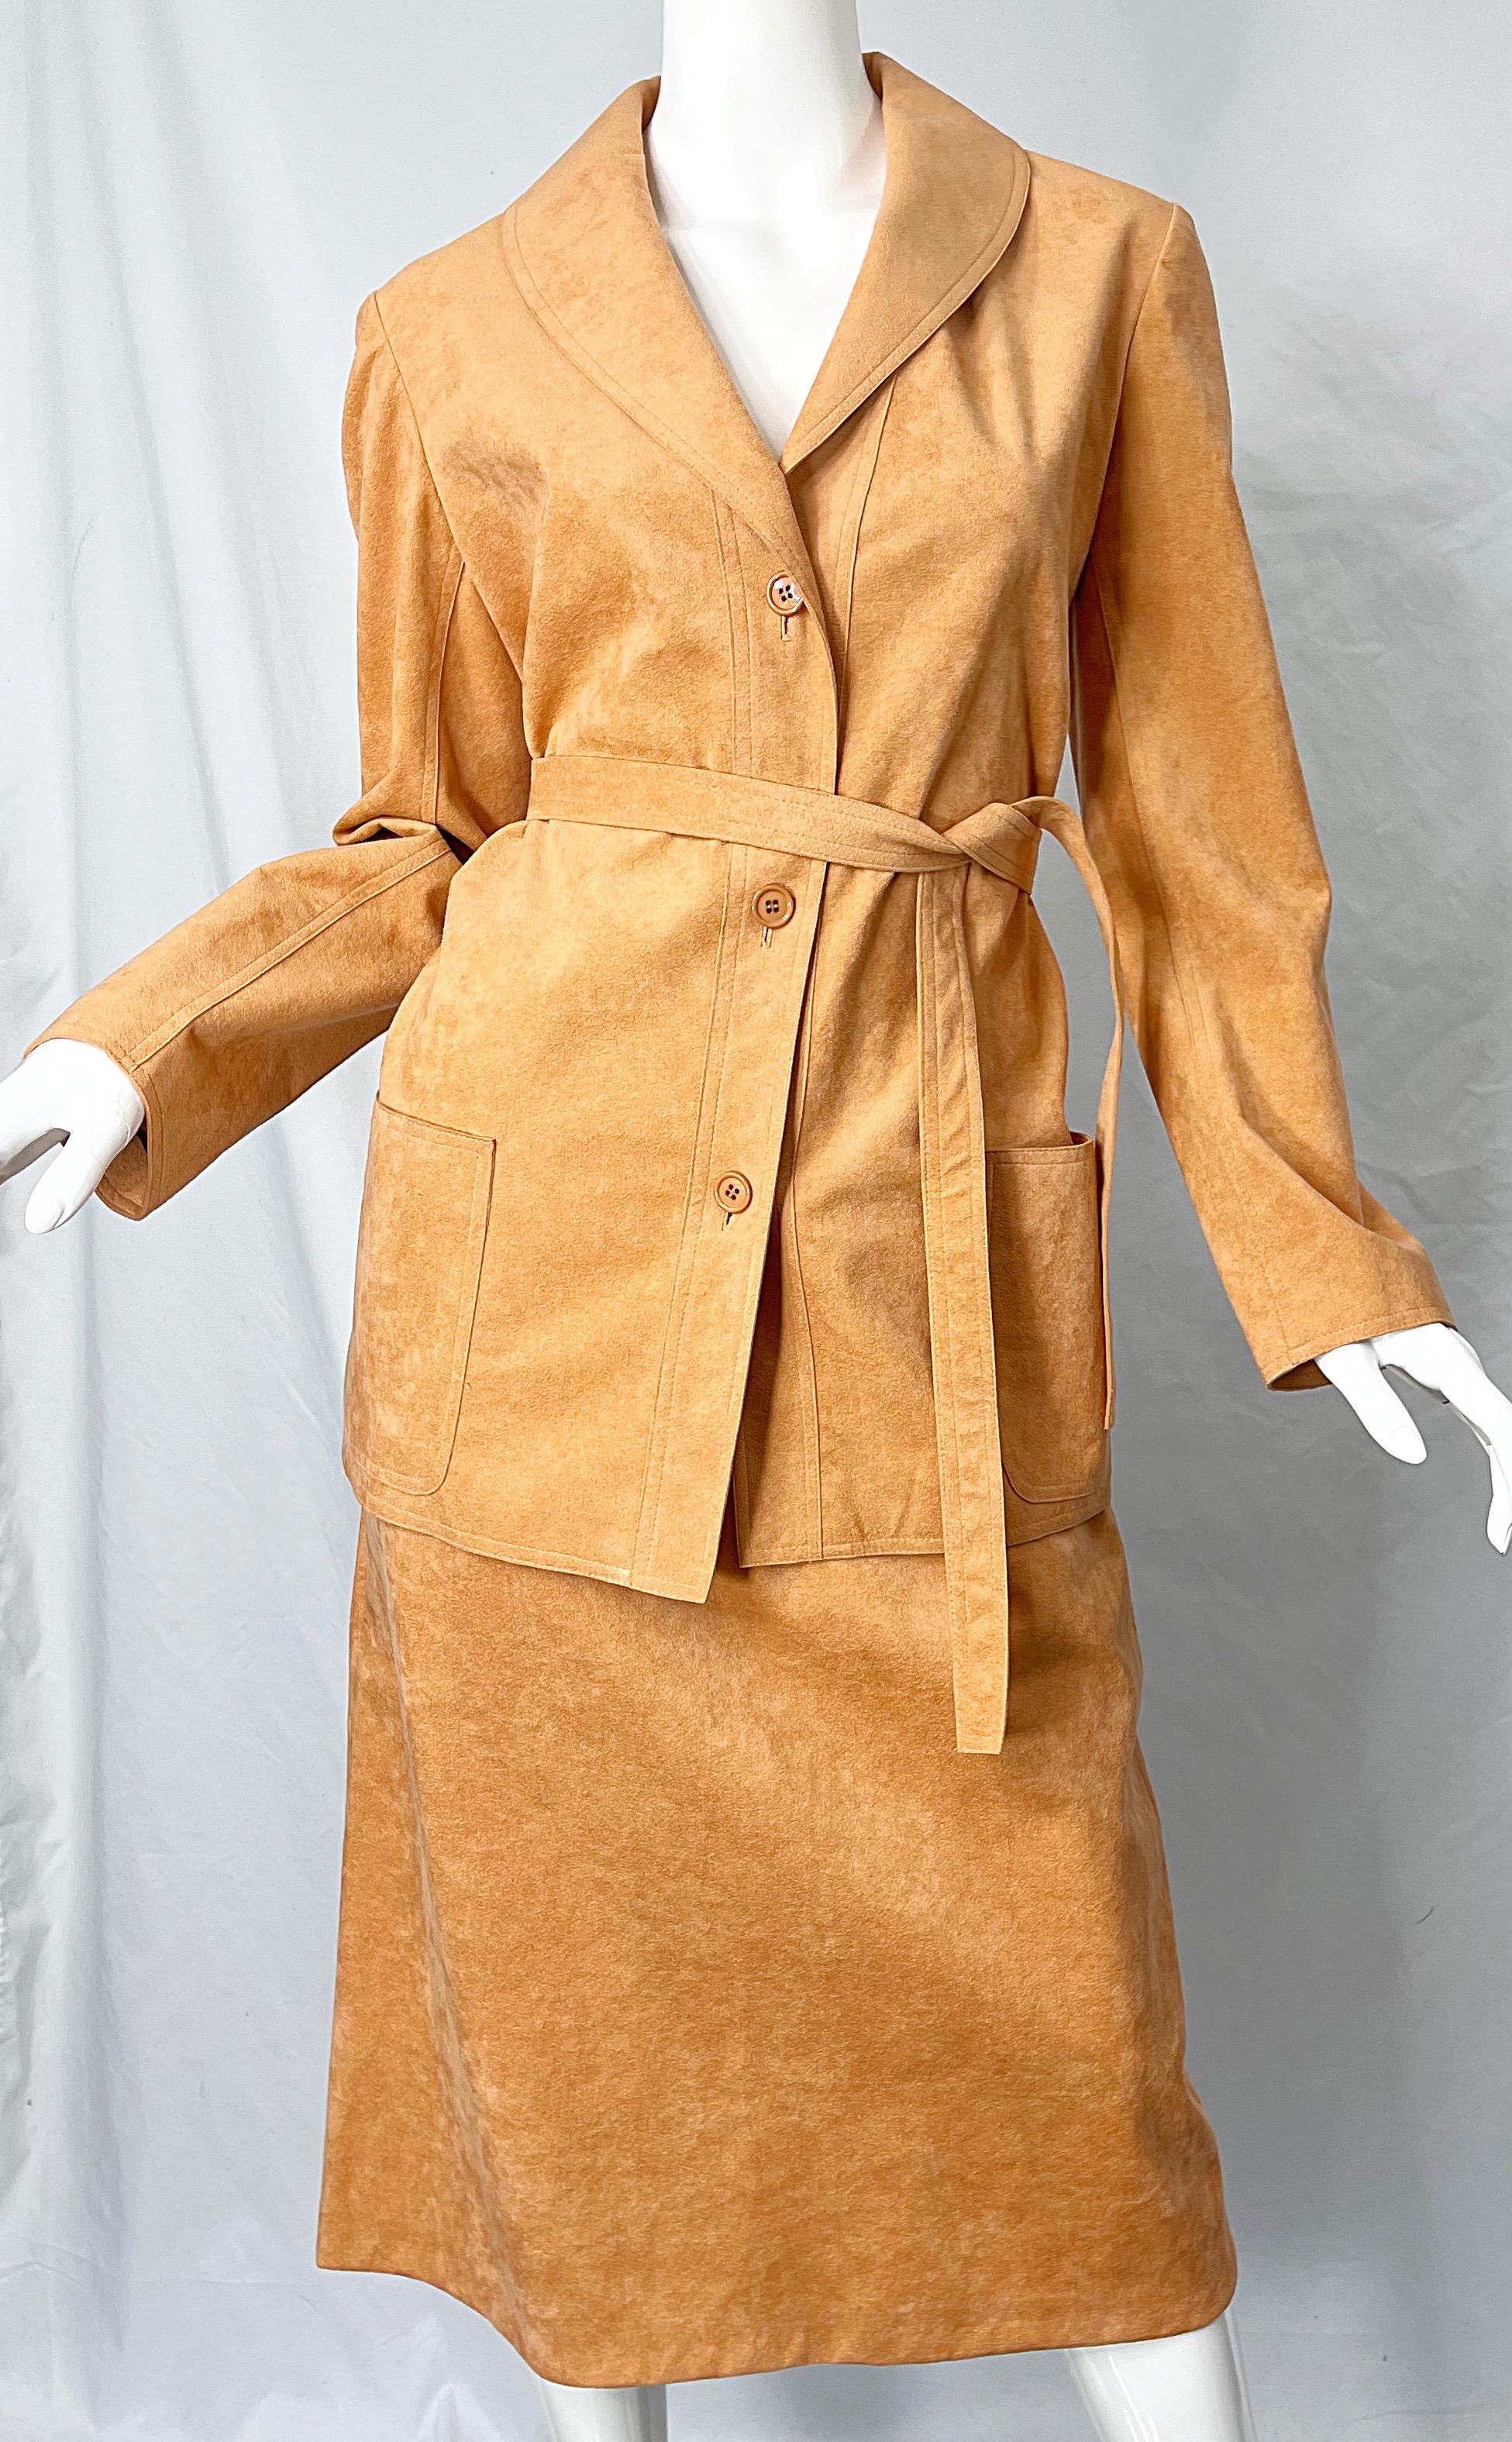 Women's Halston 1970s Salmon Peach Ultrasuede Vintage 70s Belted Jacket and Skirt Suit For Sale